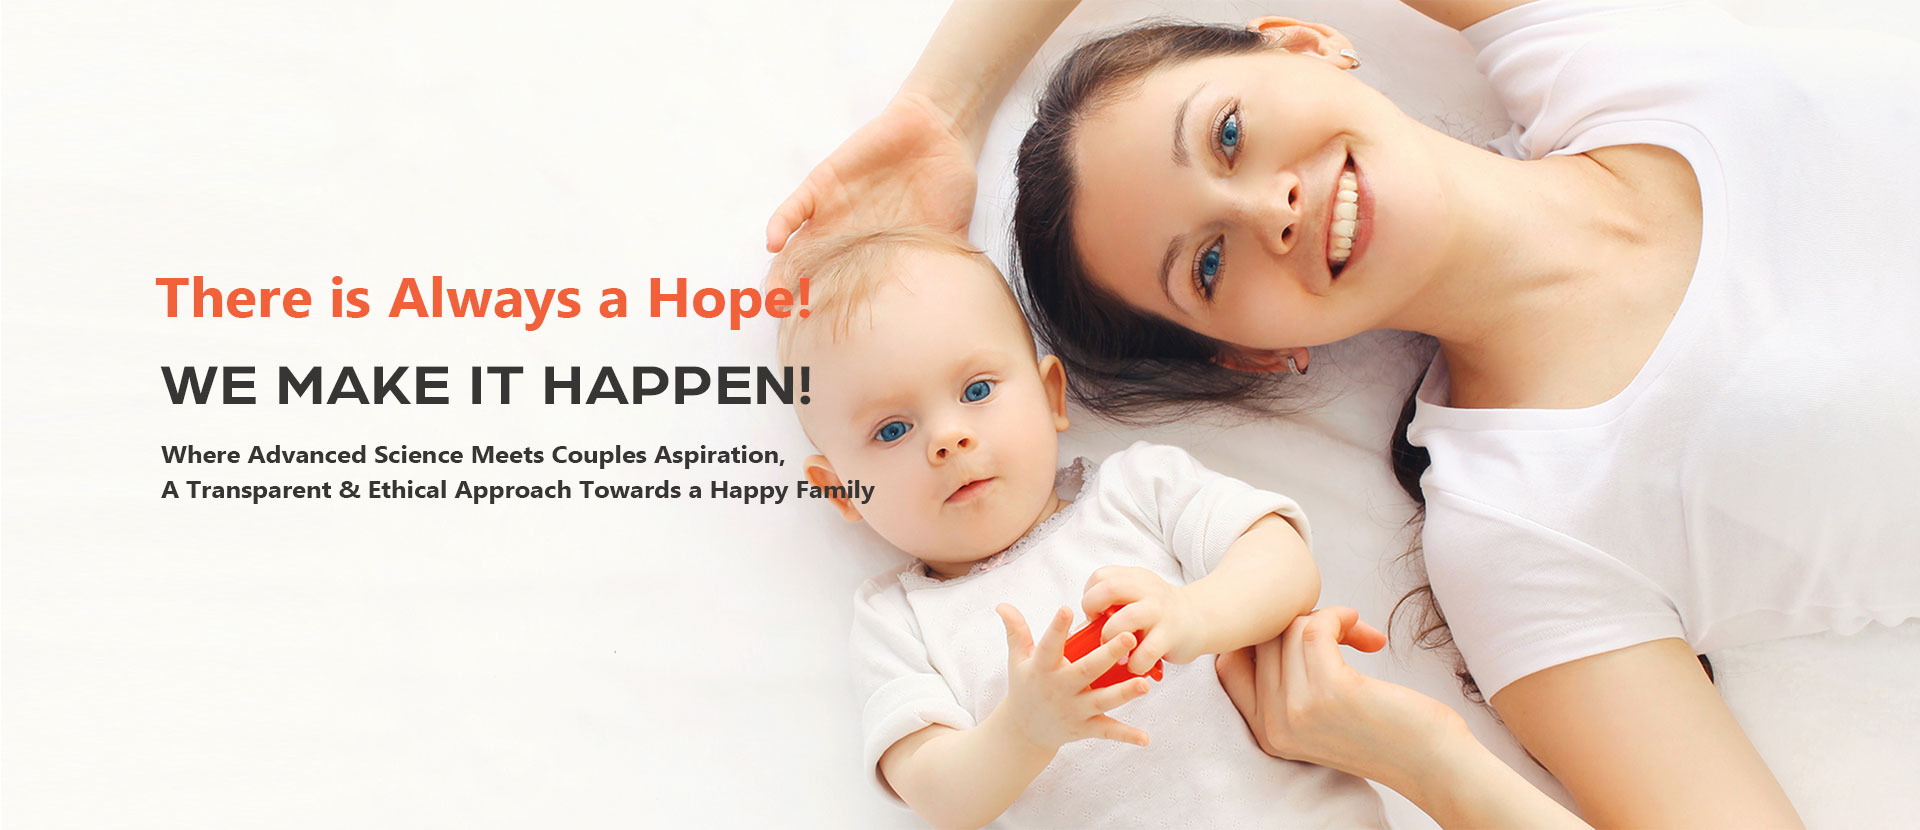 The Most Trusted Fertility Centre in India and Healthcare Brand - Hegde Fertility